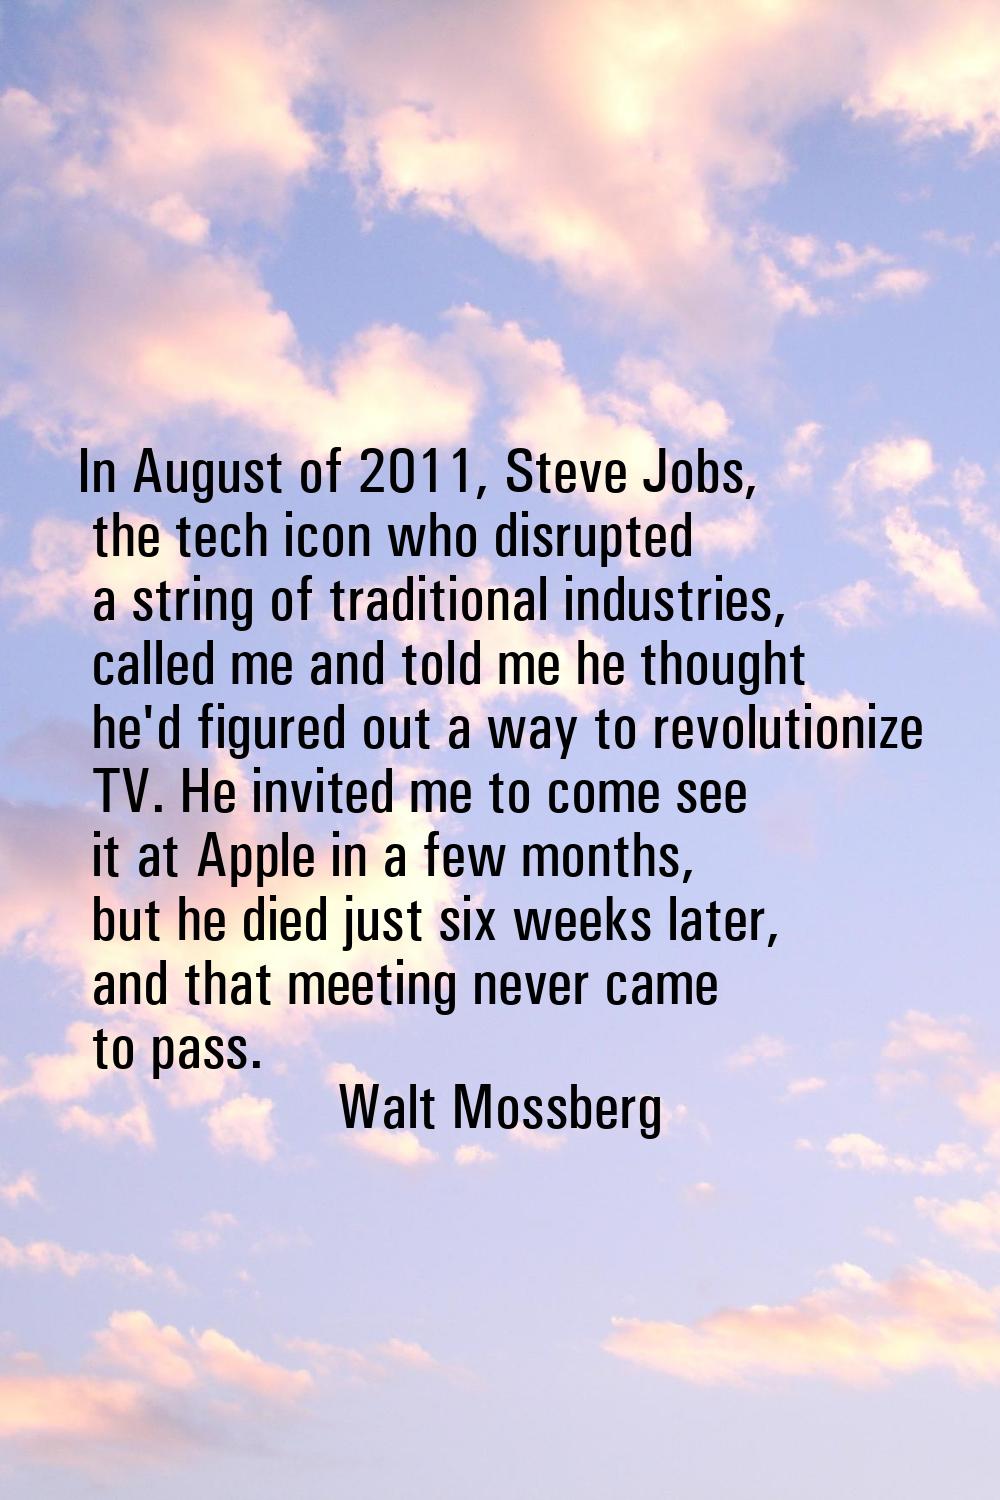 In August of 2011, Steve Jobs, the tech icon who disrupted a string of traditional industries, call